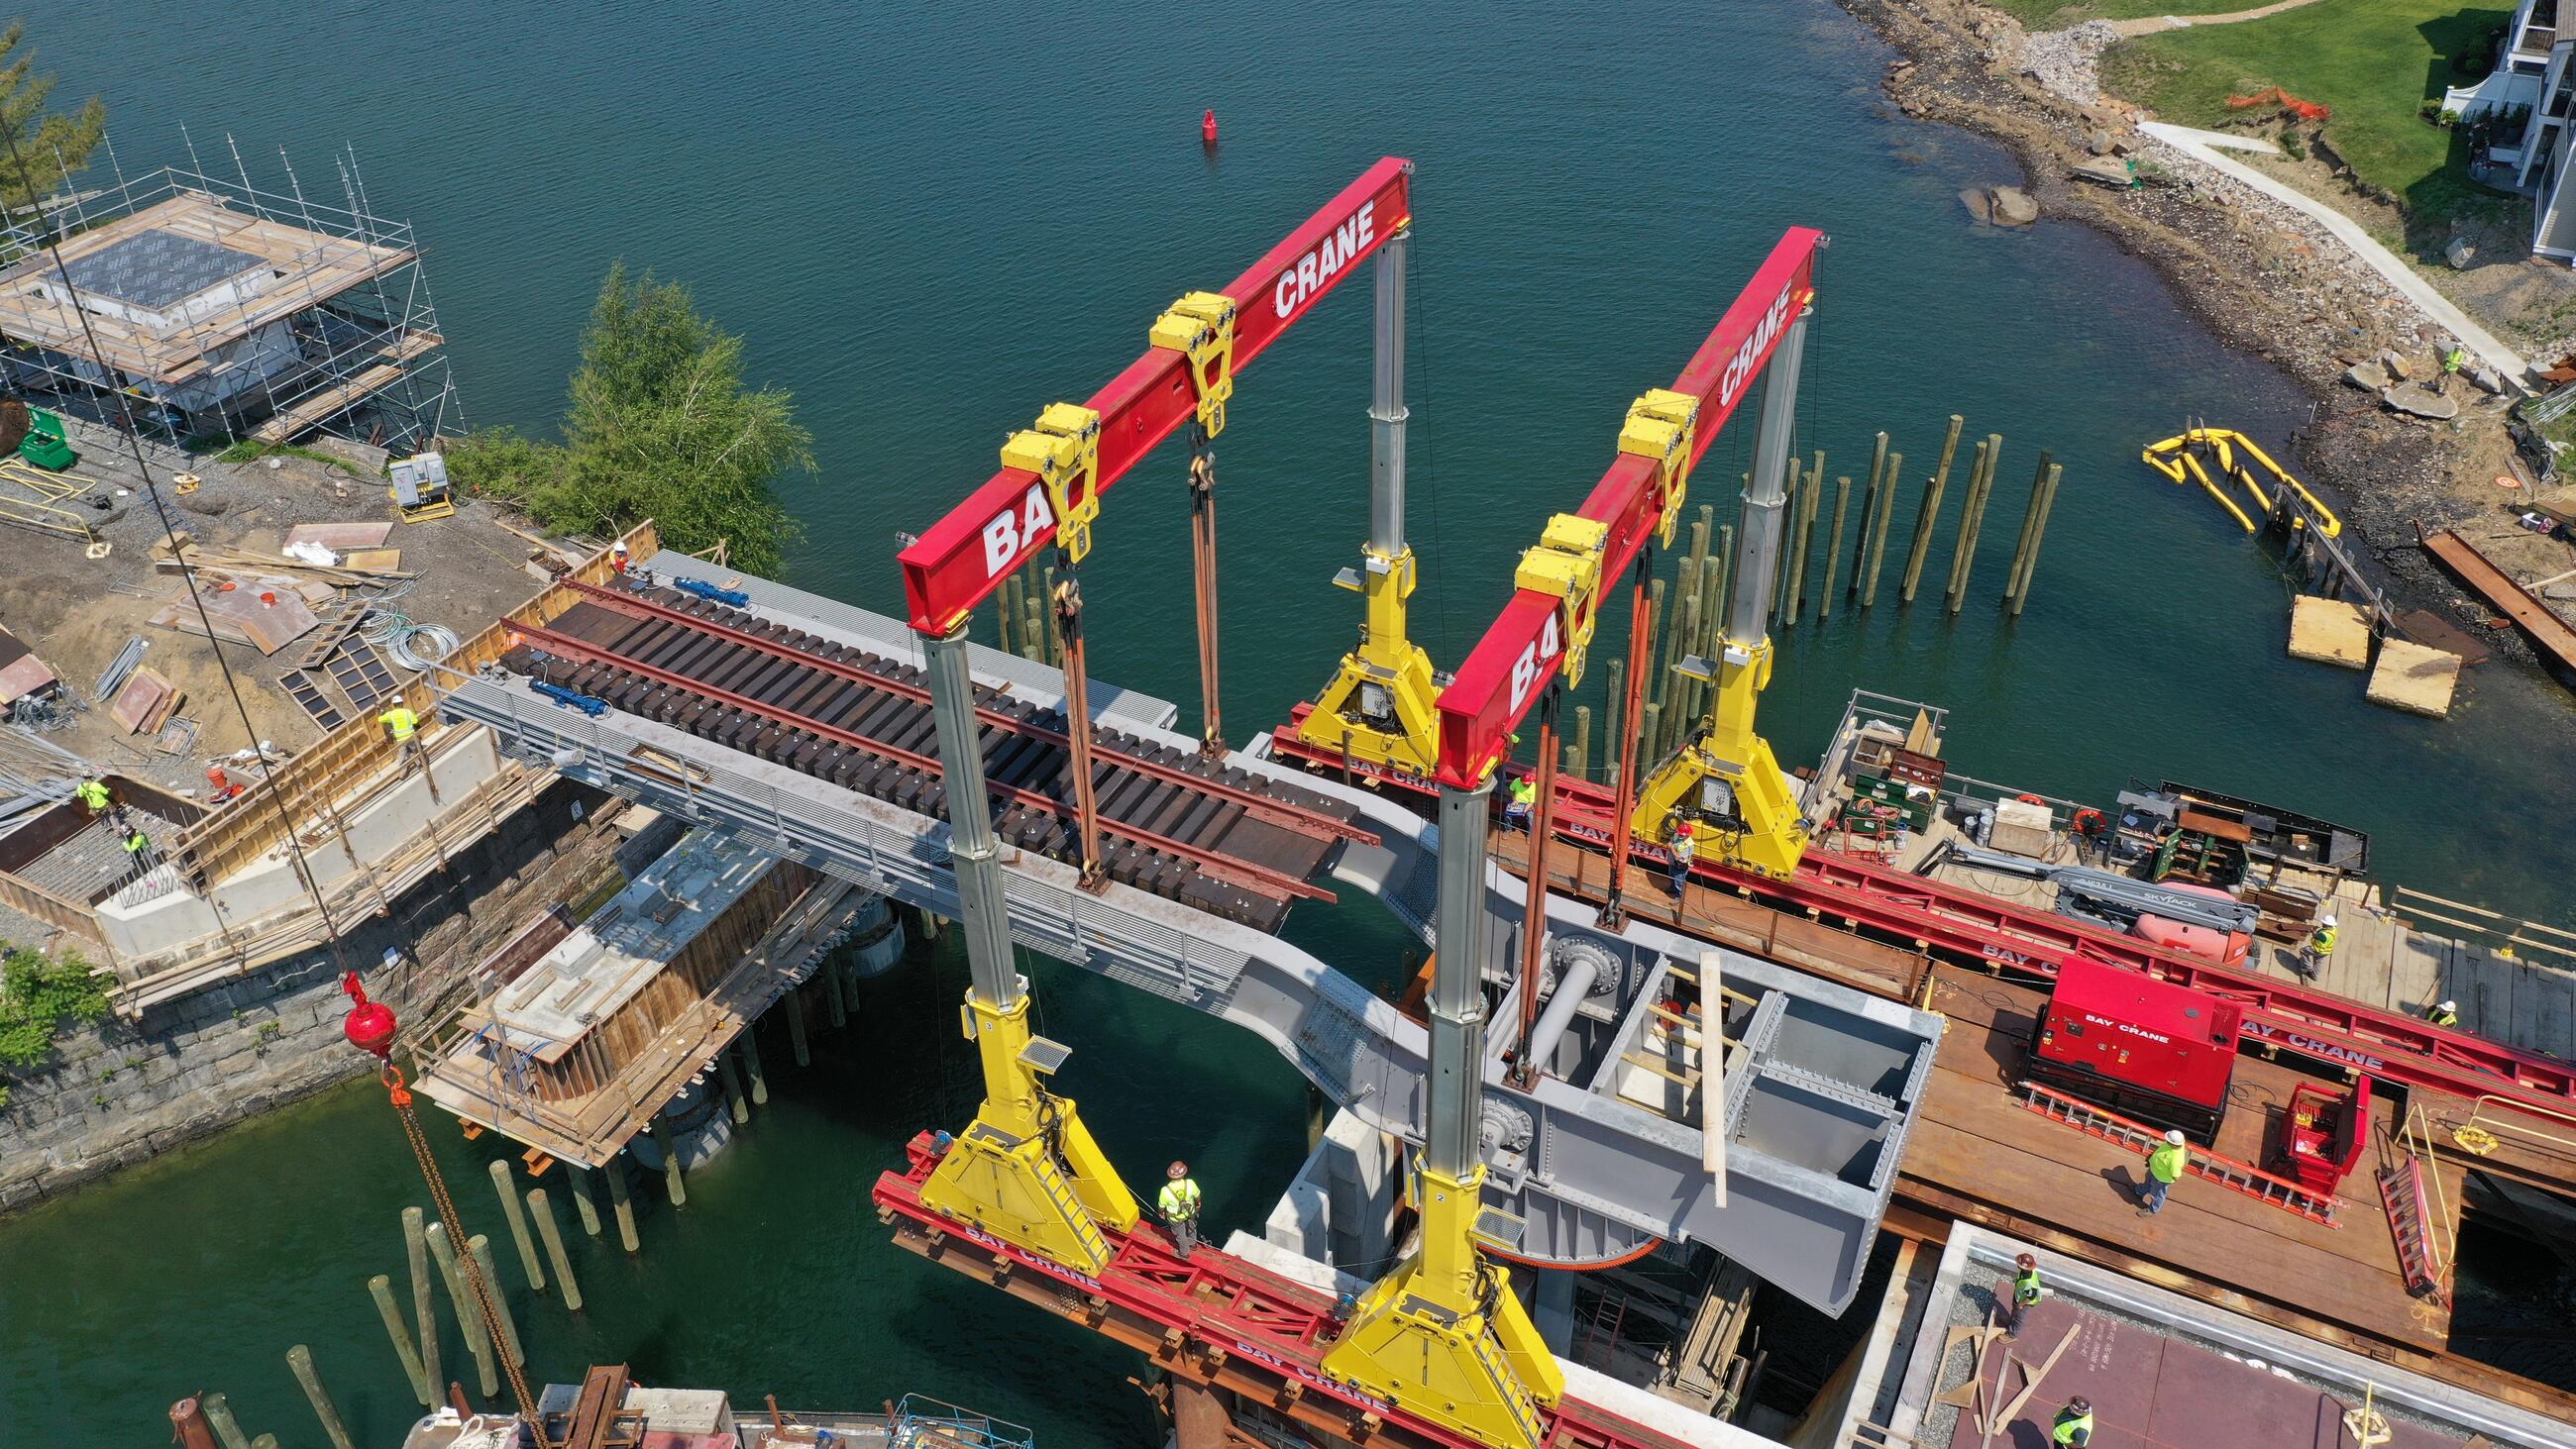 Bird's eye view of bascule span placement